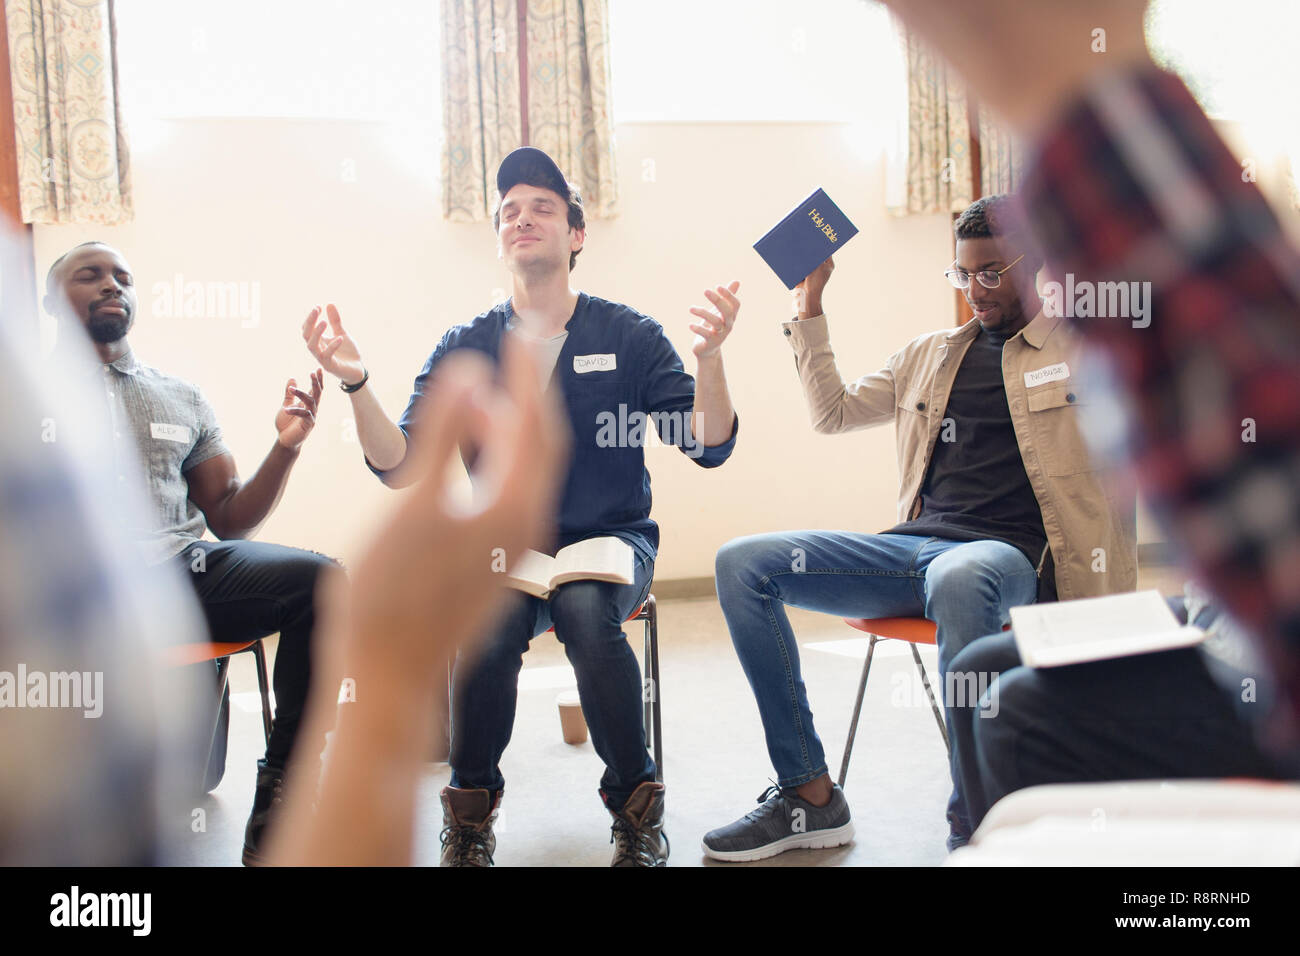 Men with bible praying with arms raised in prayer group Stock Photo